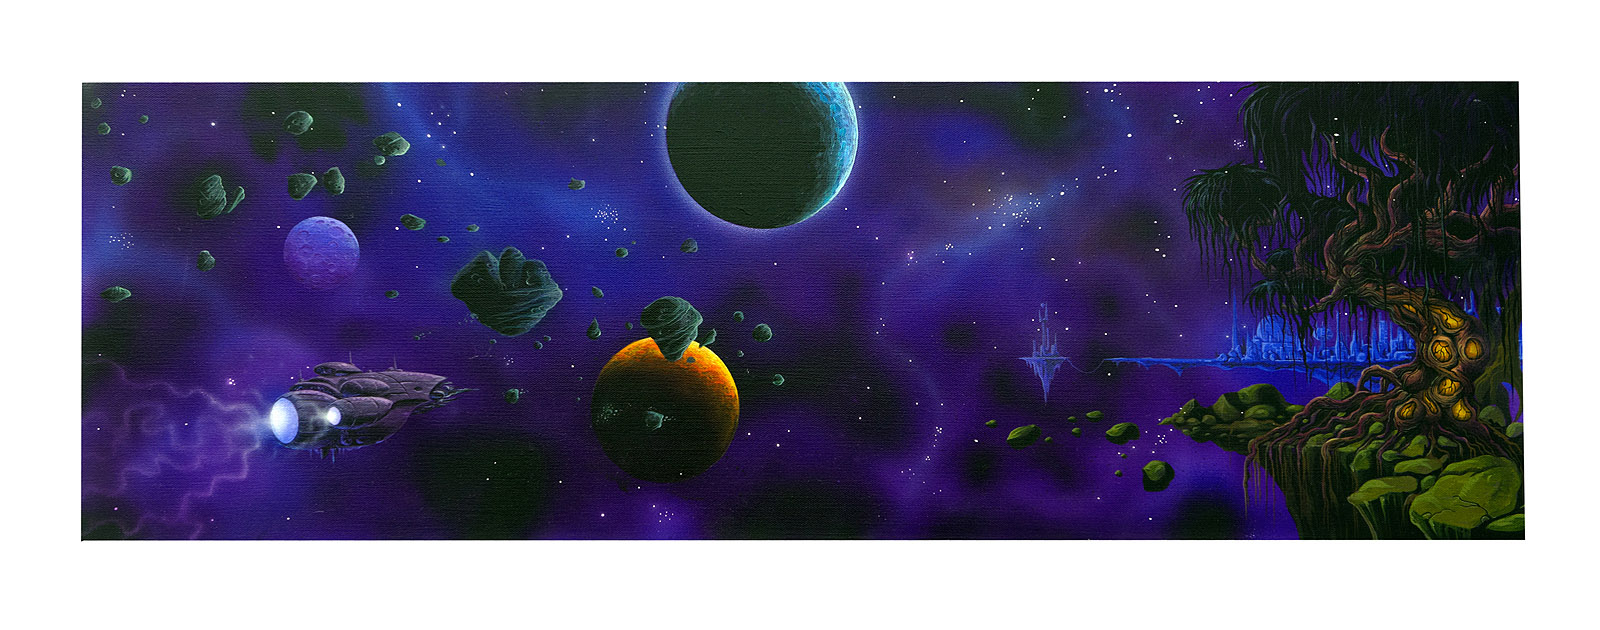 space traveler painting 12 x 36 acrilic canavs